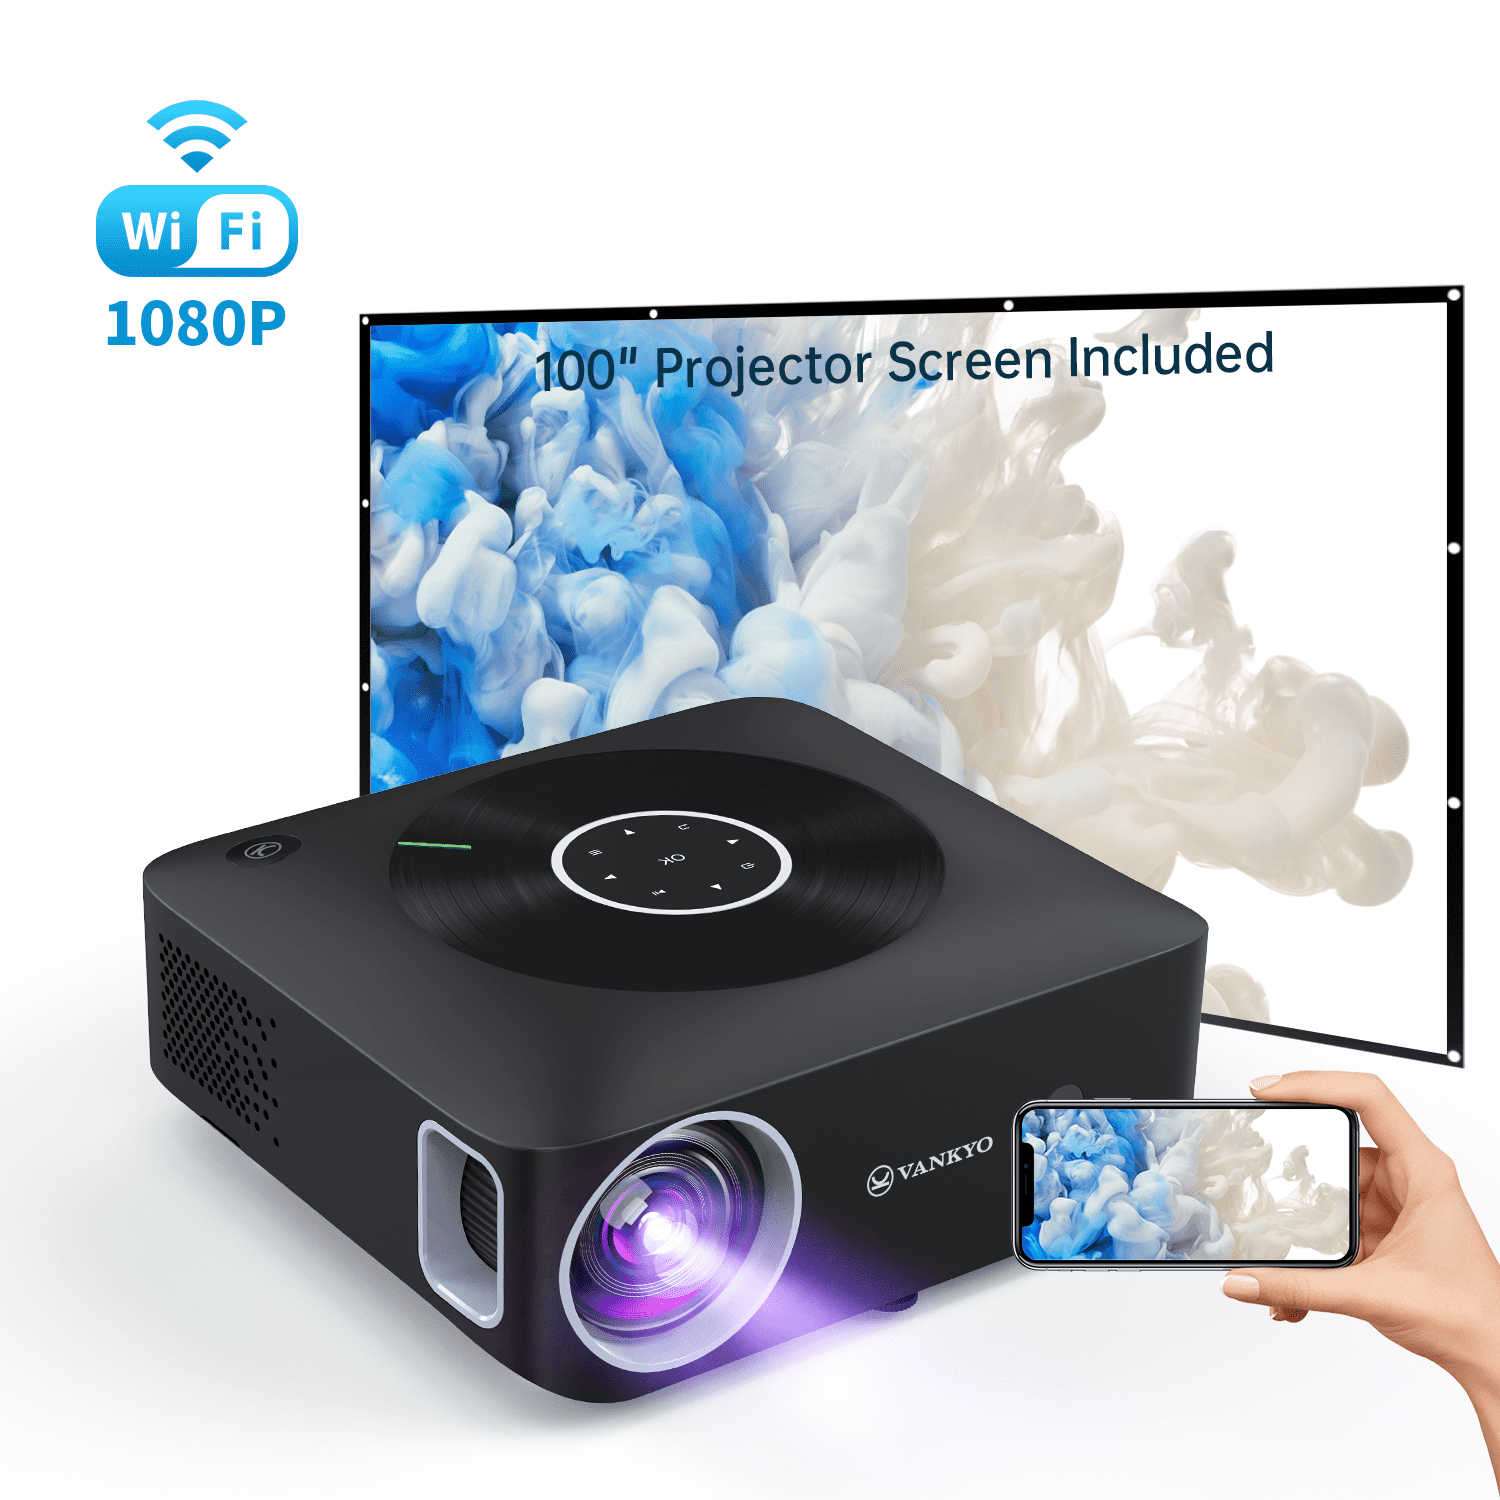 AV Ideal for Christmas Decor Smartphone, HDMI SD Compatible W/ TV Stick 8500L Mini Projector with 100 Projector Screen Latest Upgraded Projector Full HD 1080P and 200 Display Supported 